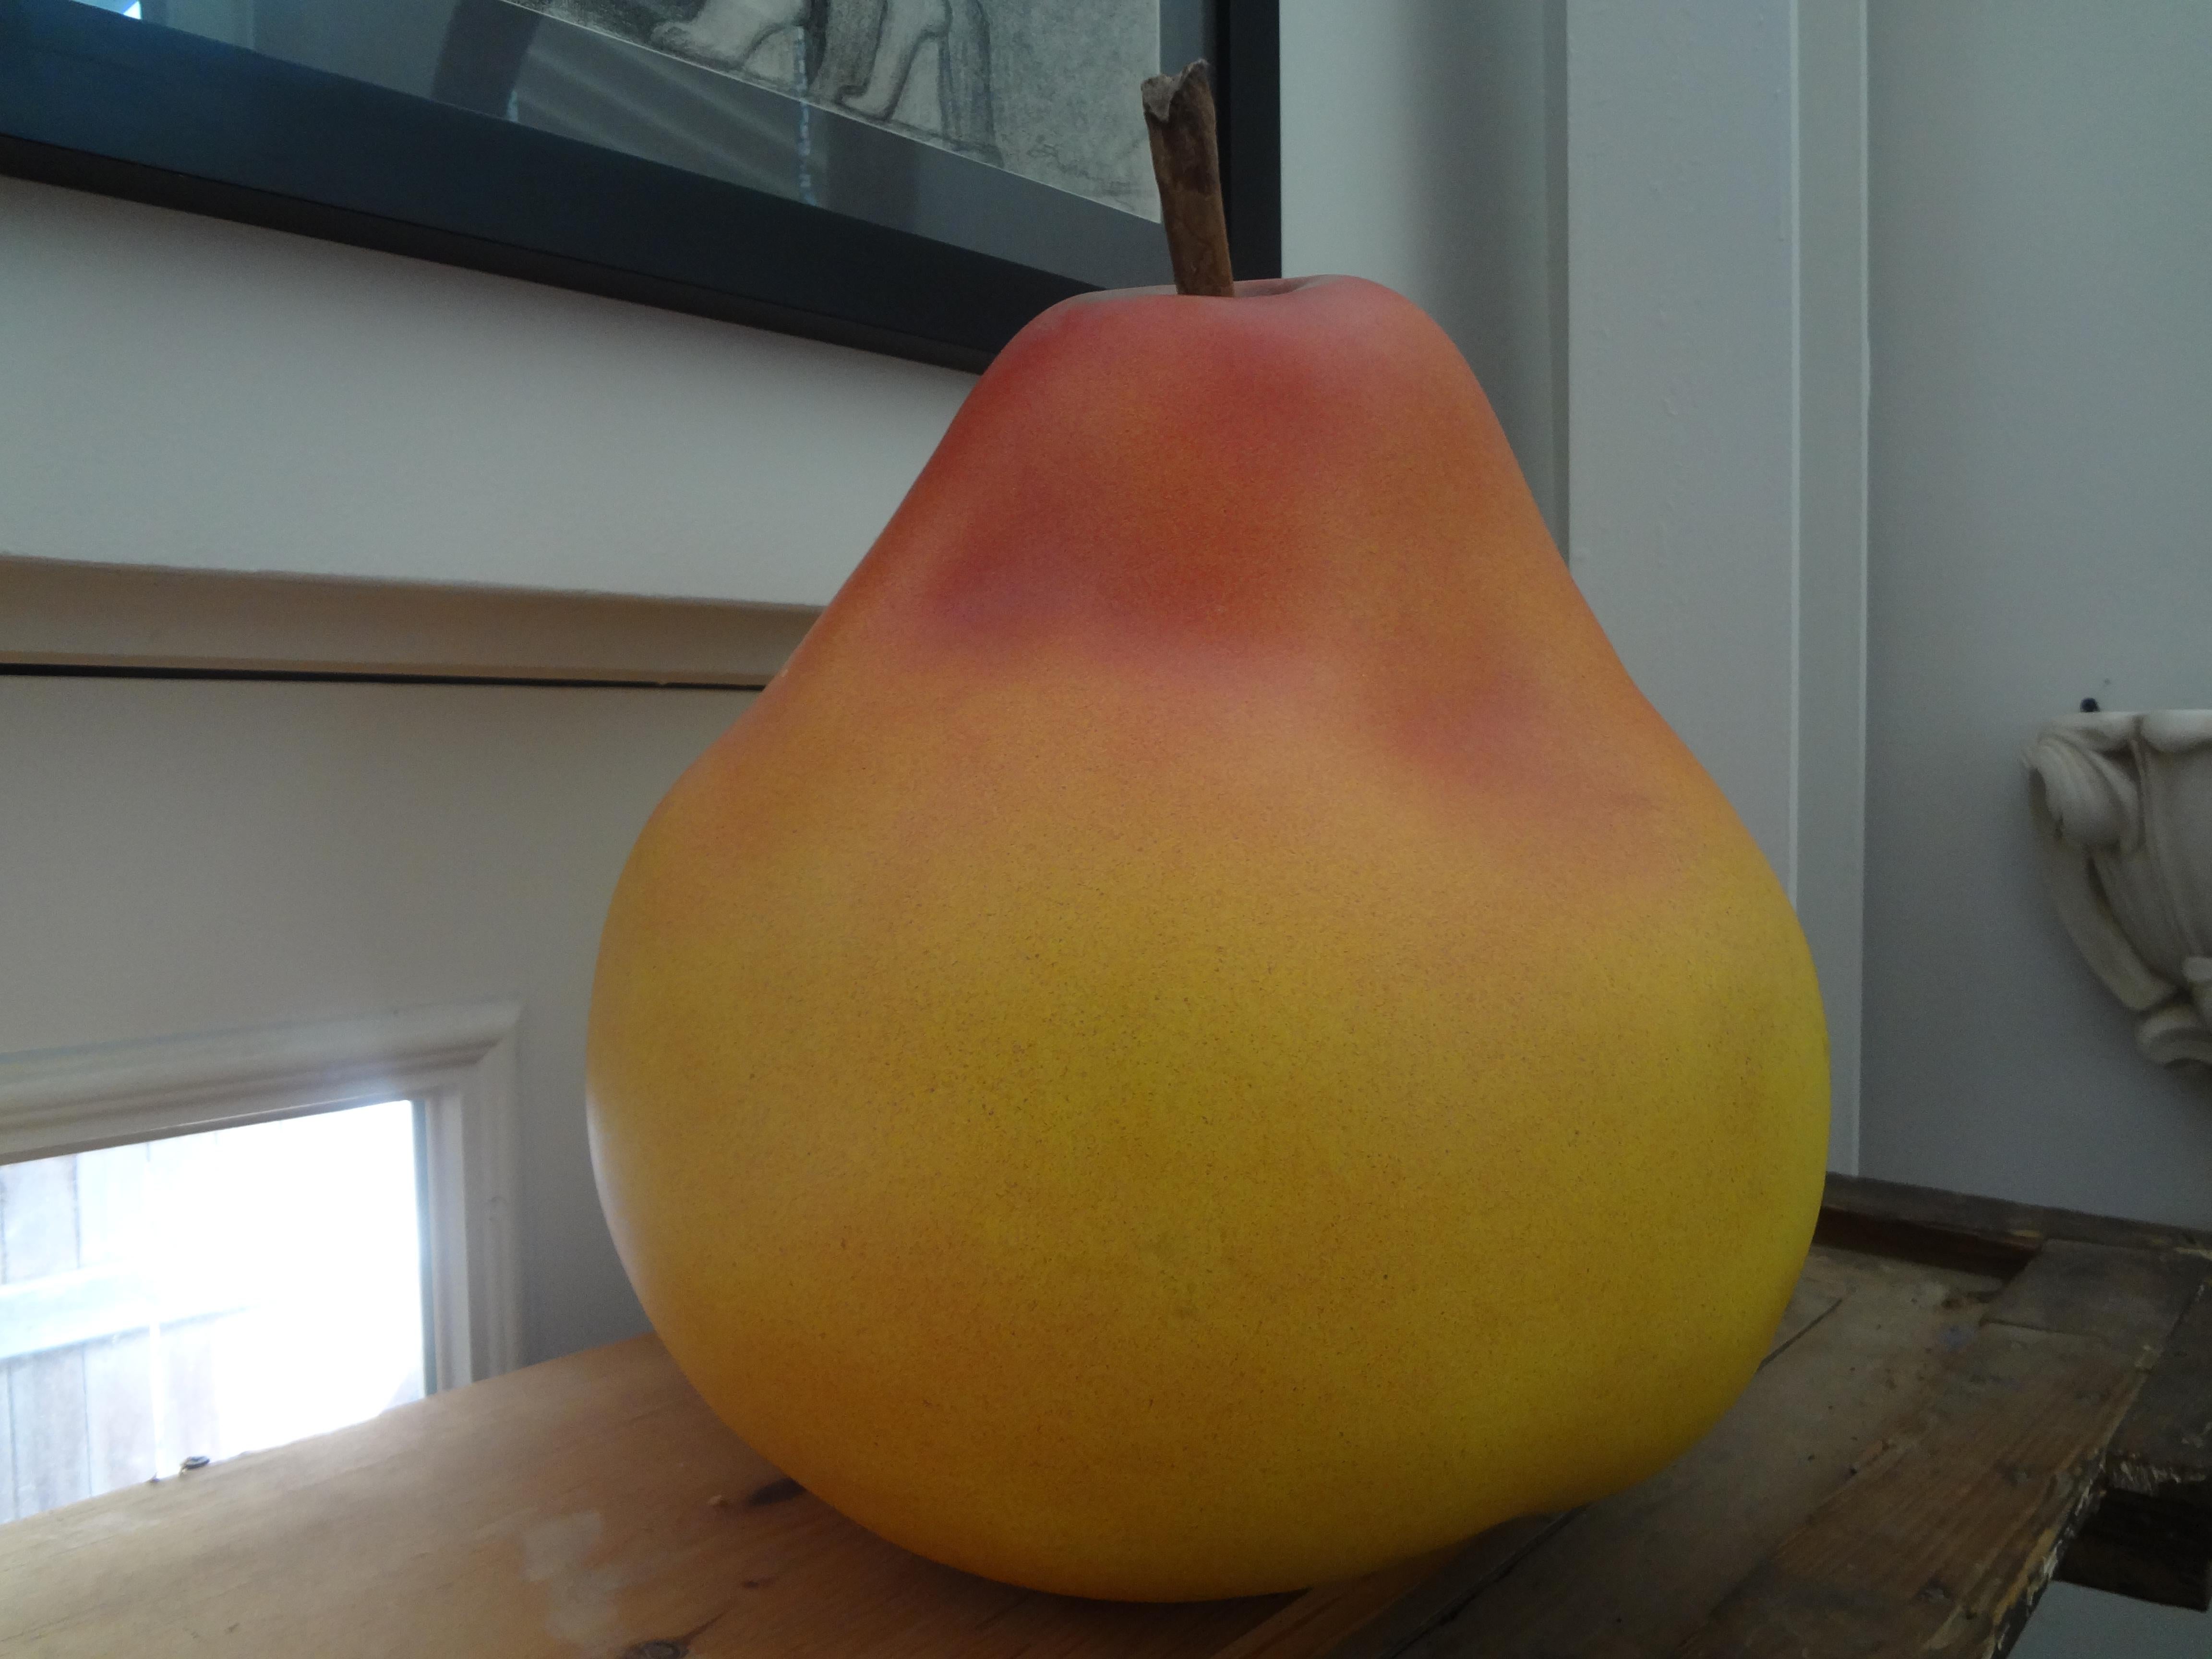 Massive postmodern Pop Art ceramic pear.
Large postmodern Pop Art ceramic pear with a wood stem. This fruit sculpture is extremely realistic looking. This gorgeous fruit is most likely Italian in origin.
Stunning accessory!